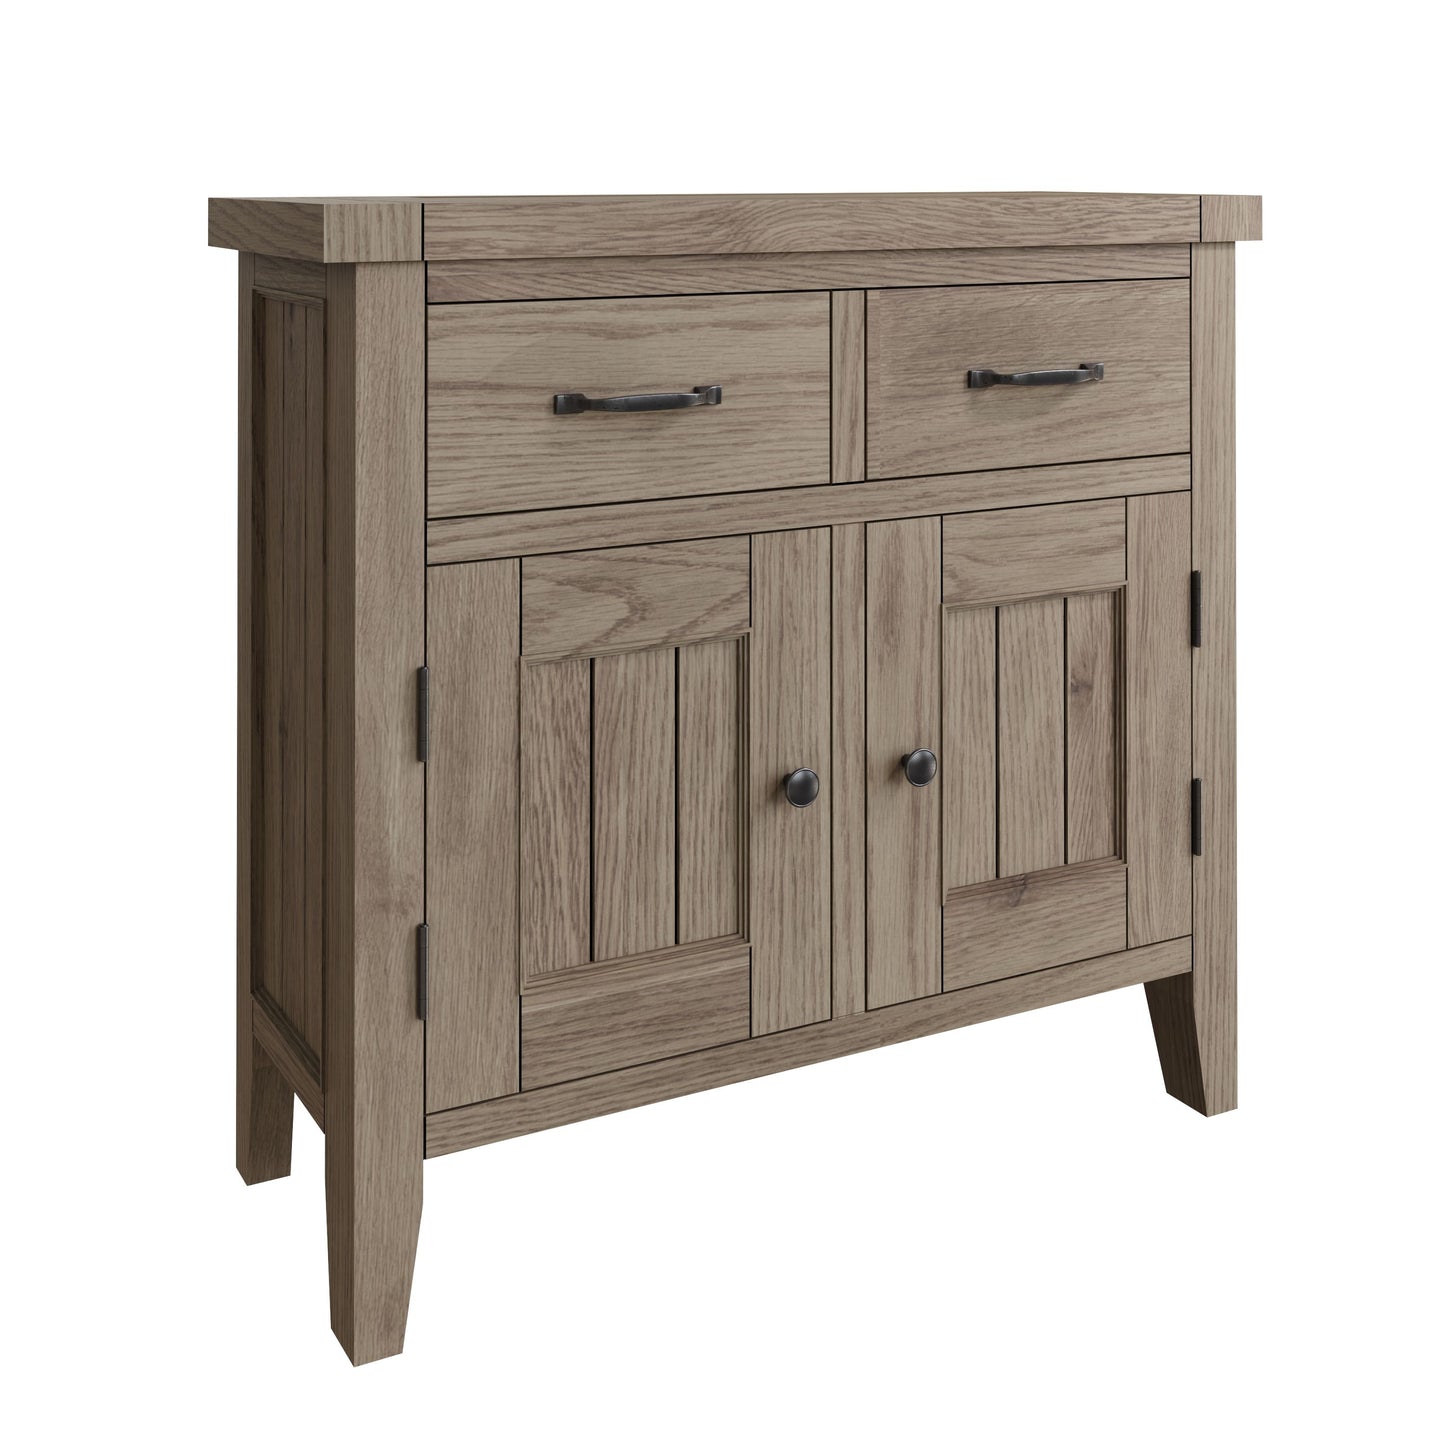 FO Small Sideboard